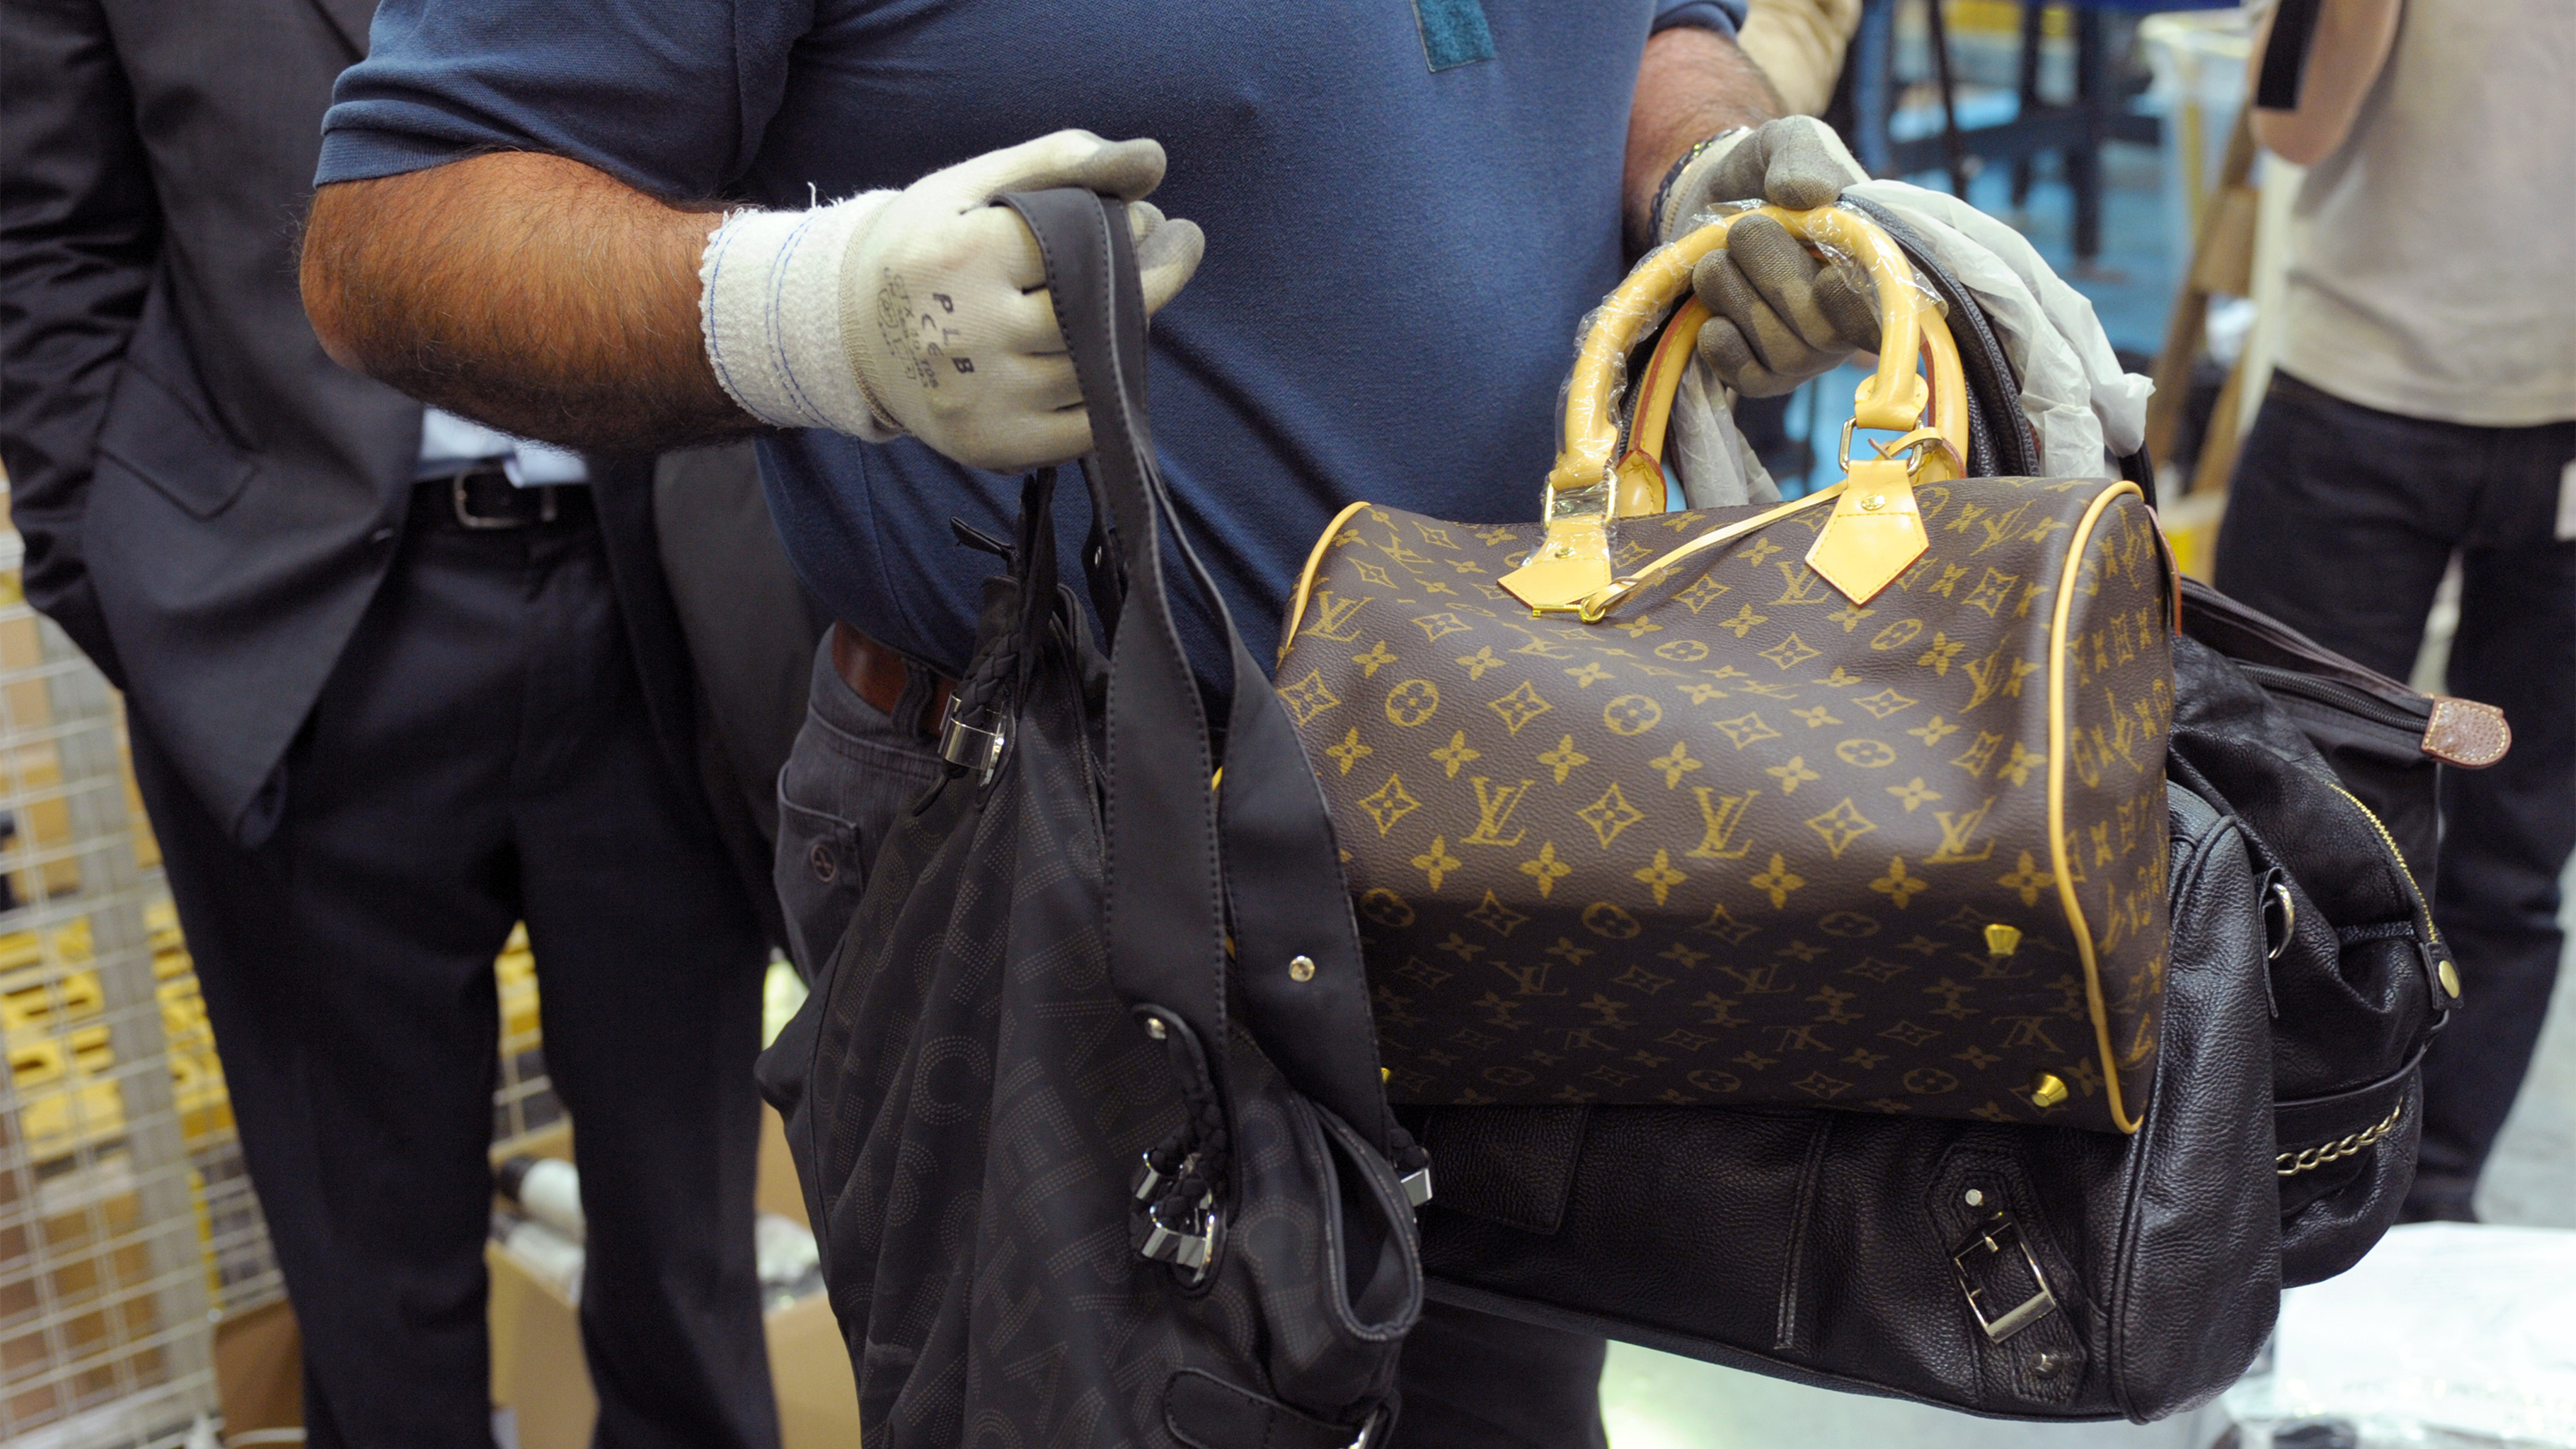 how to tell if a lv bag is real or fake